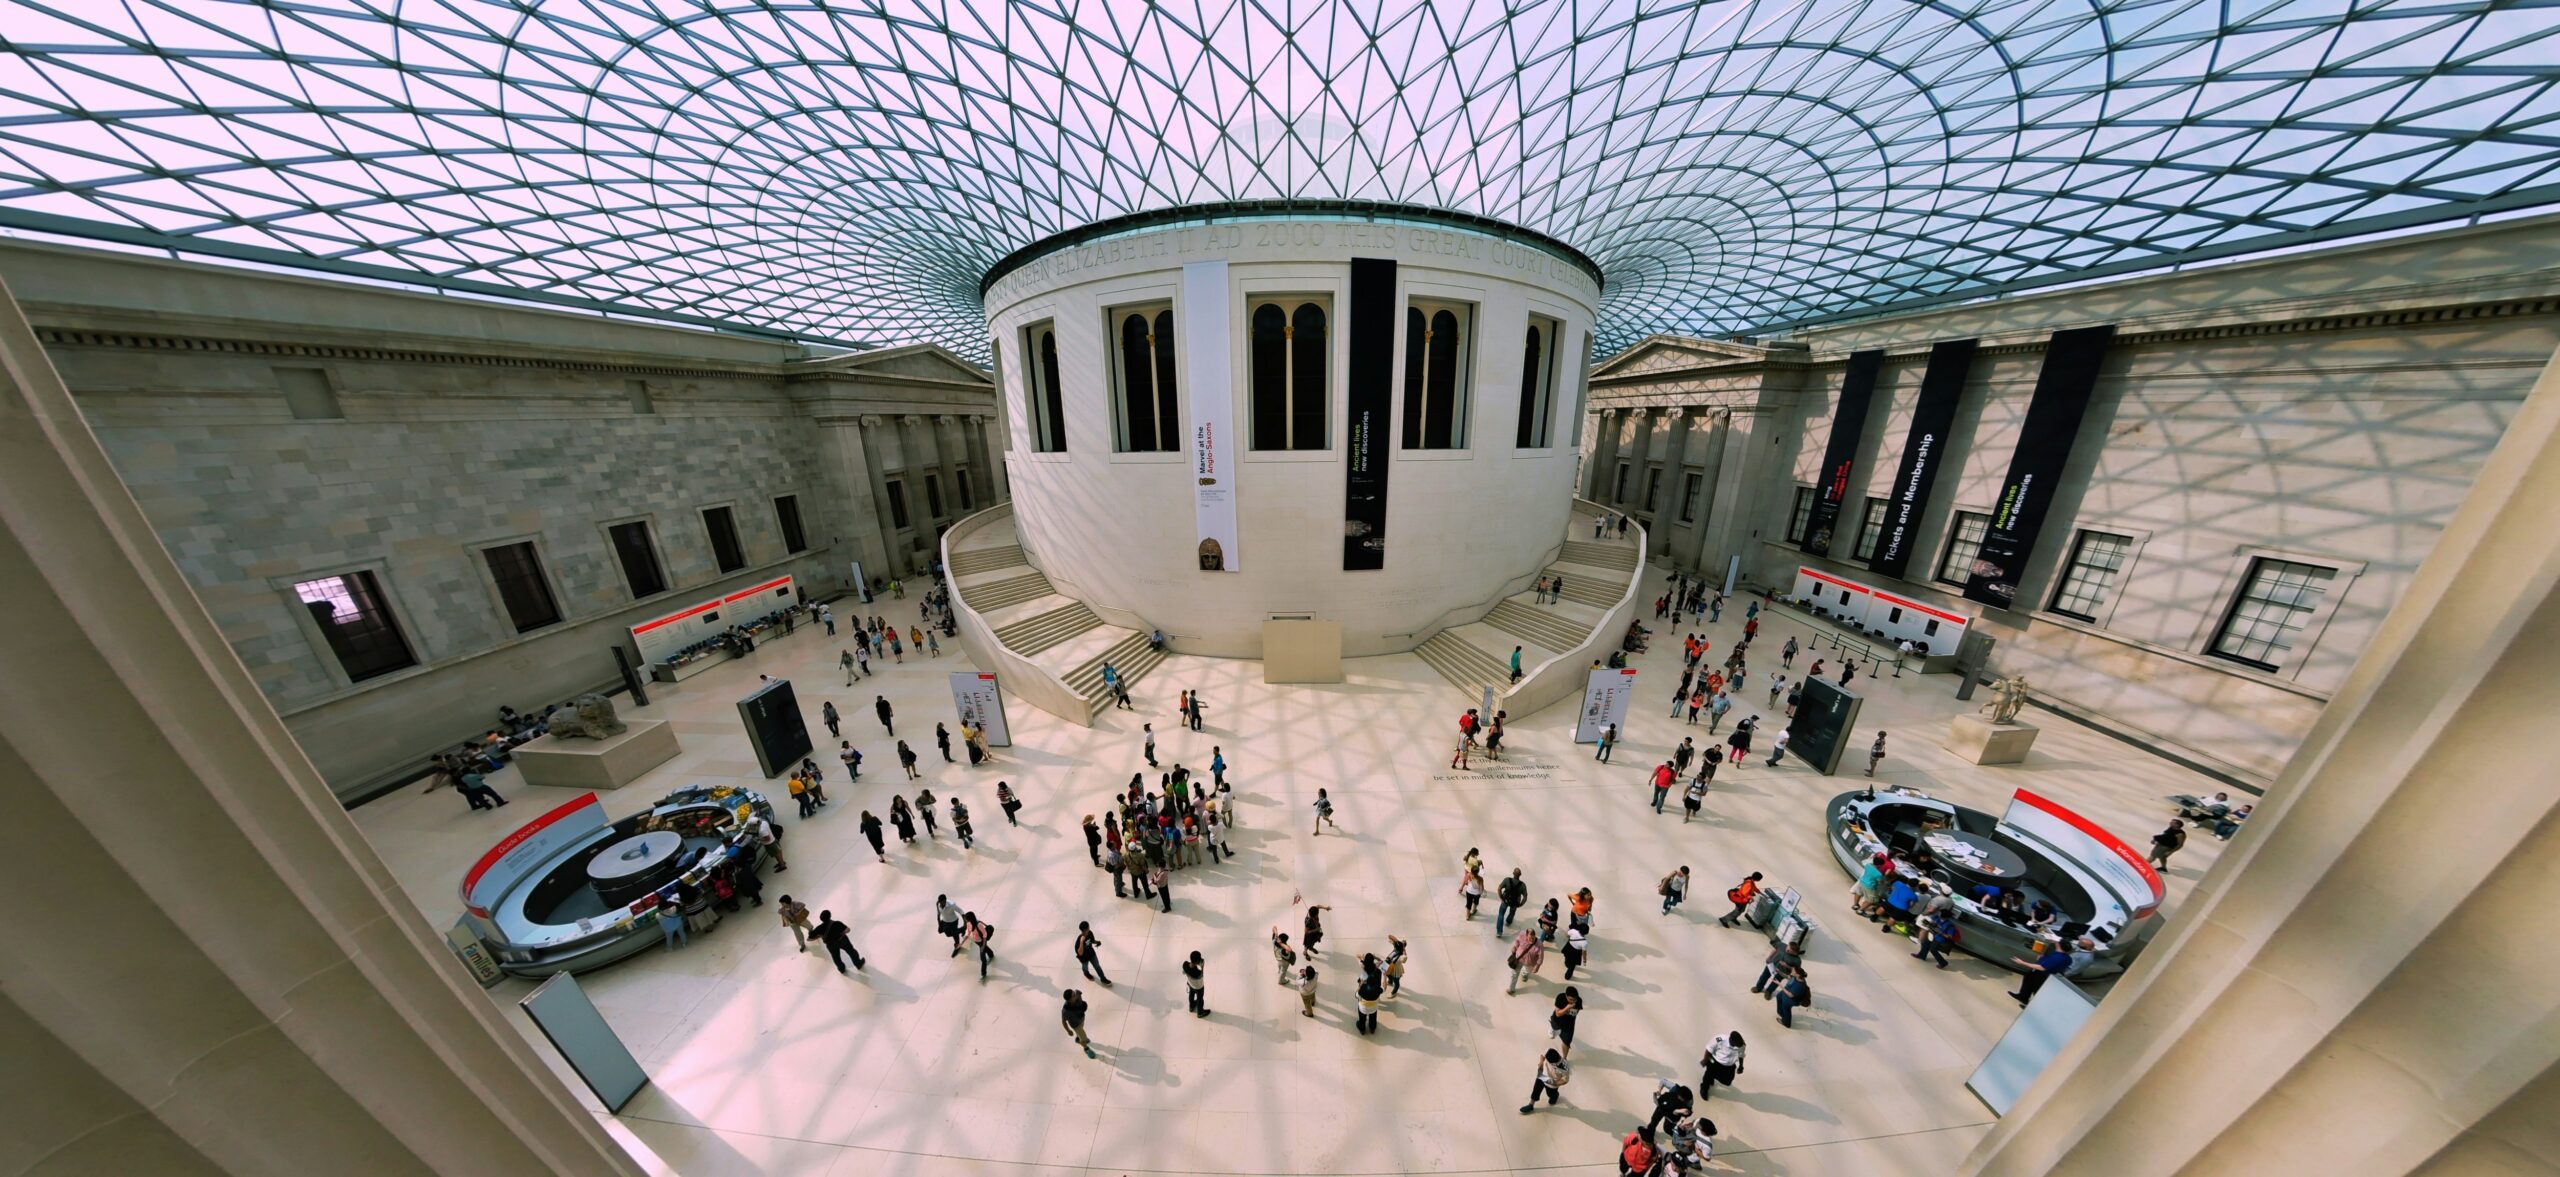 The British Museum, looking across the central great hall